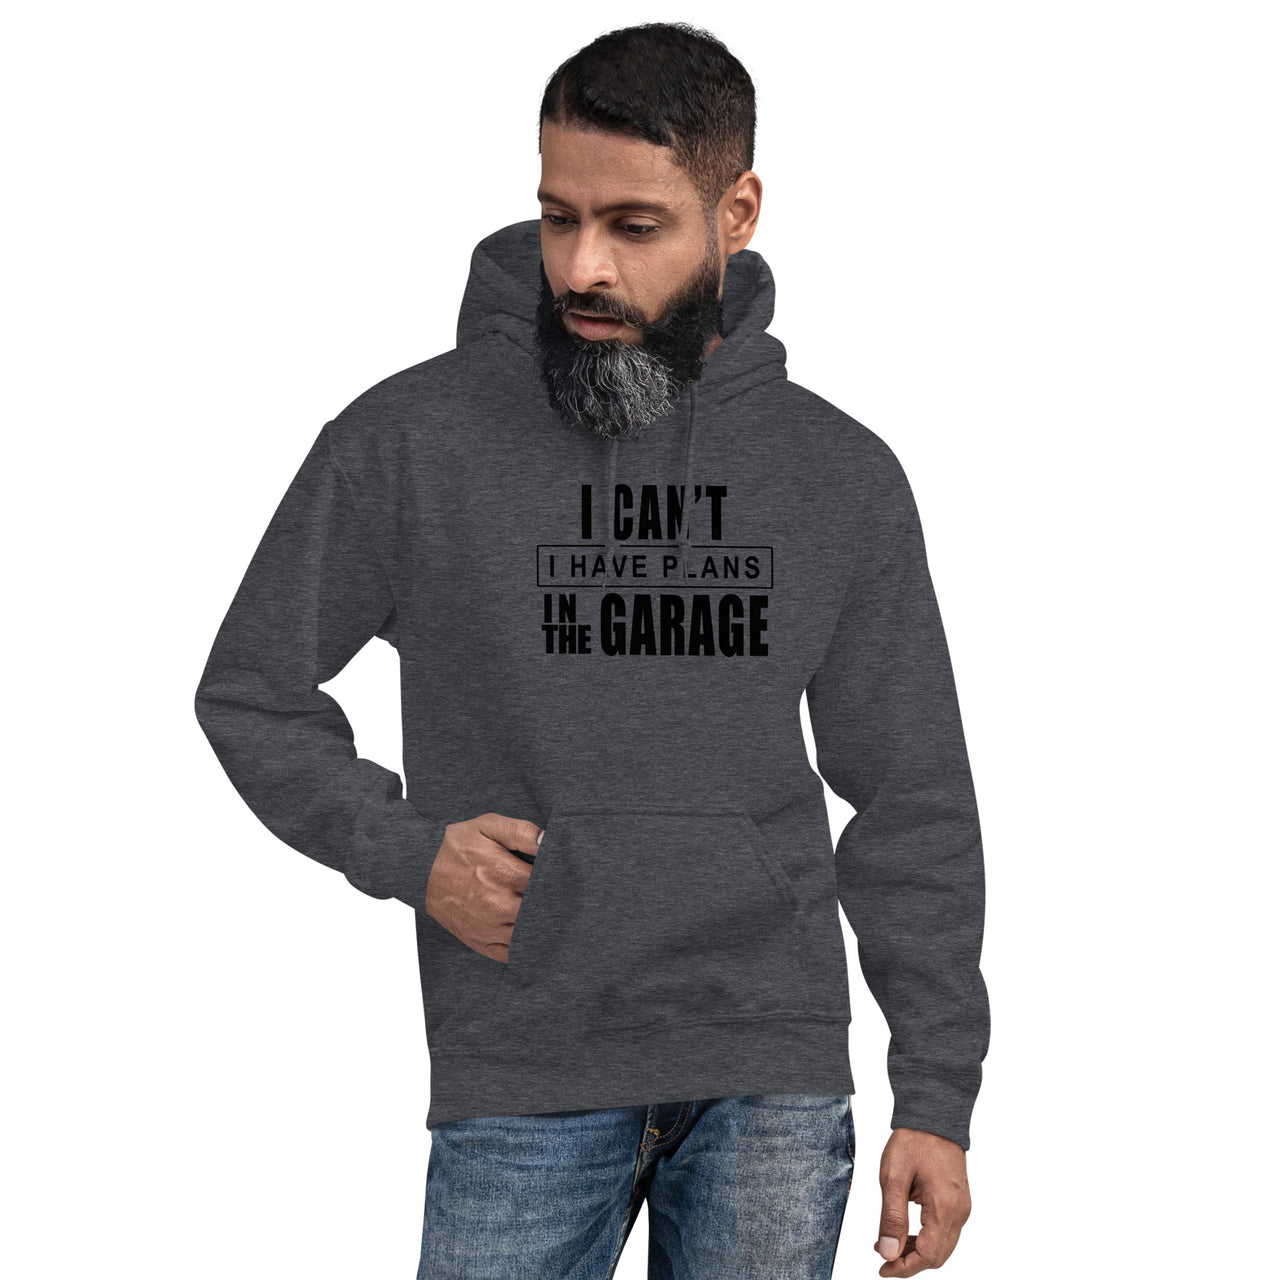 Funny Mechanic Sweatshirt Car Enthusiast Hoodie Gift Idea - I Have Plans In The garage - modeled in Grey